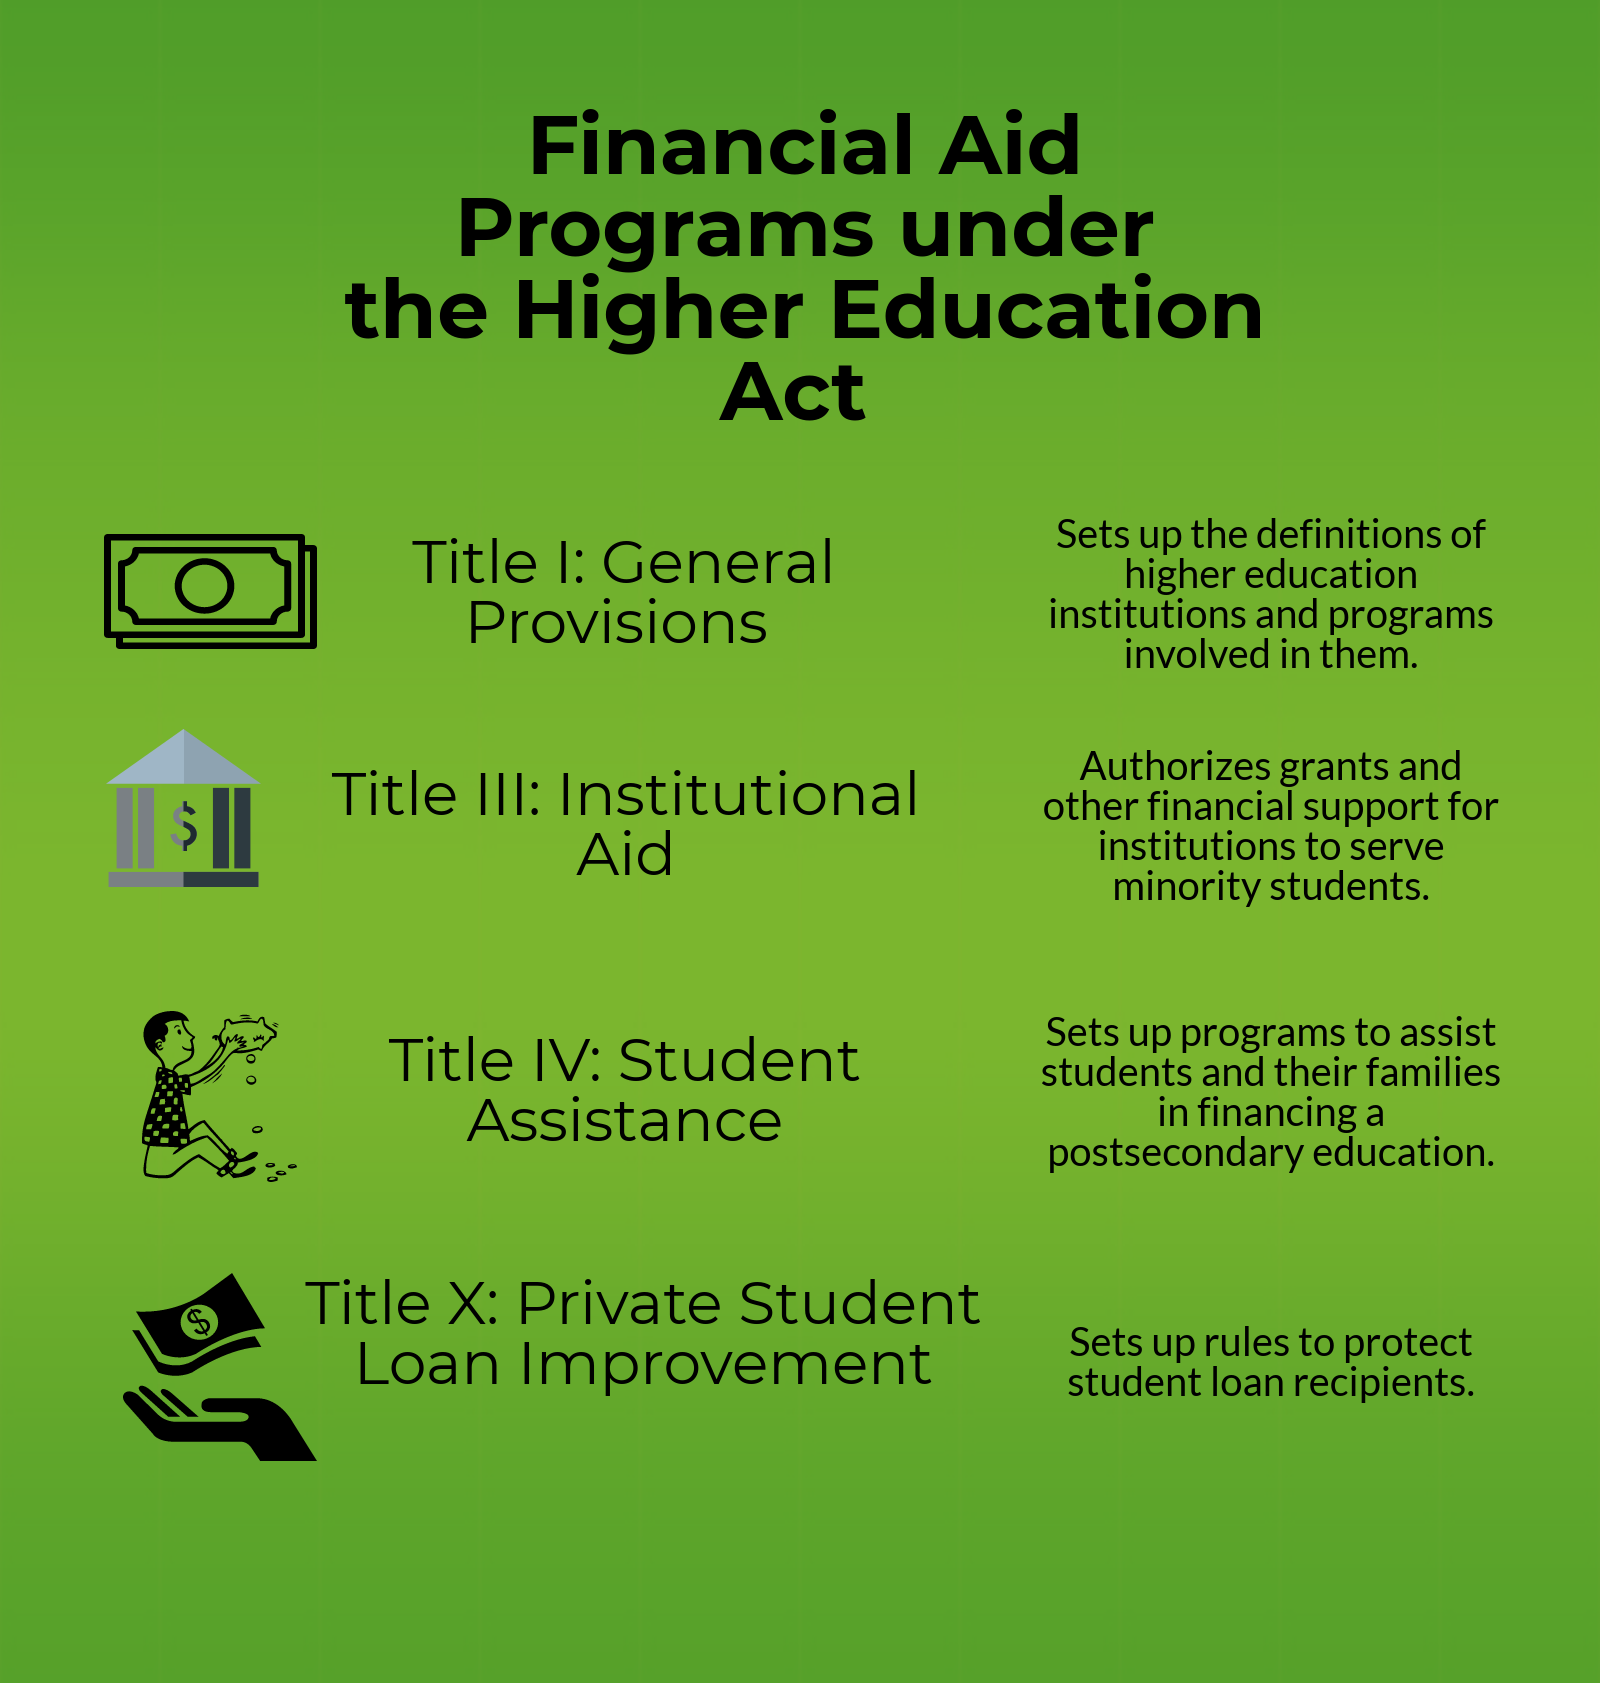 Financial Aid In Higher Education Aims To